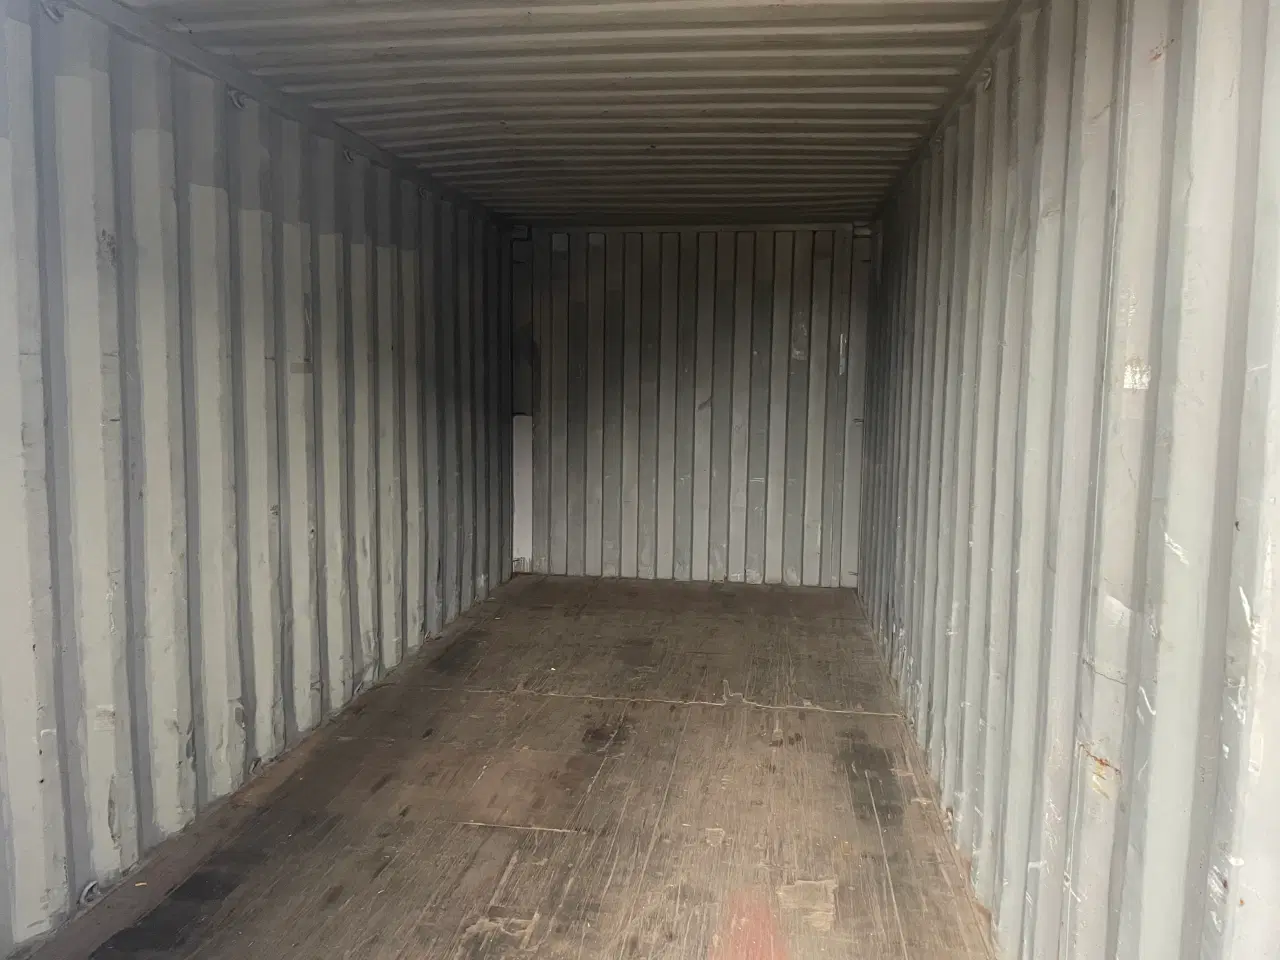 Billede 2 - 20 fods Container - ID: CAIU 224015-2